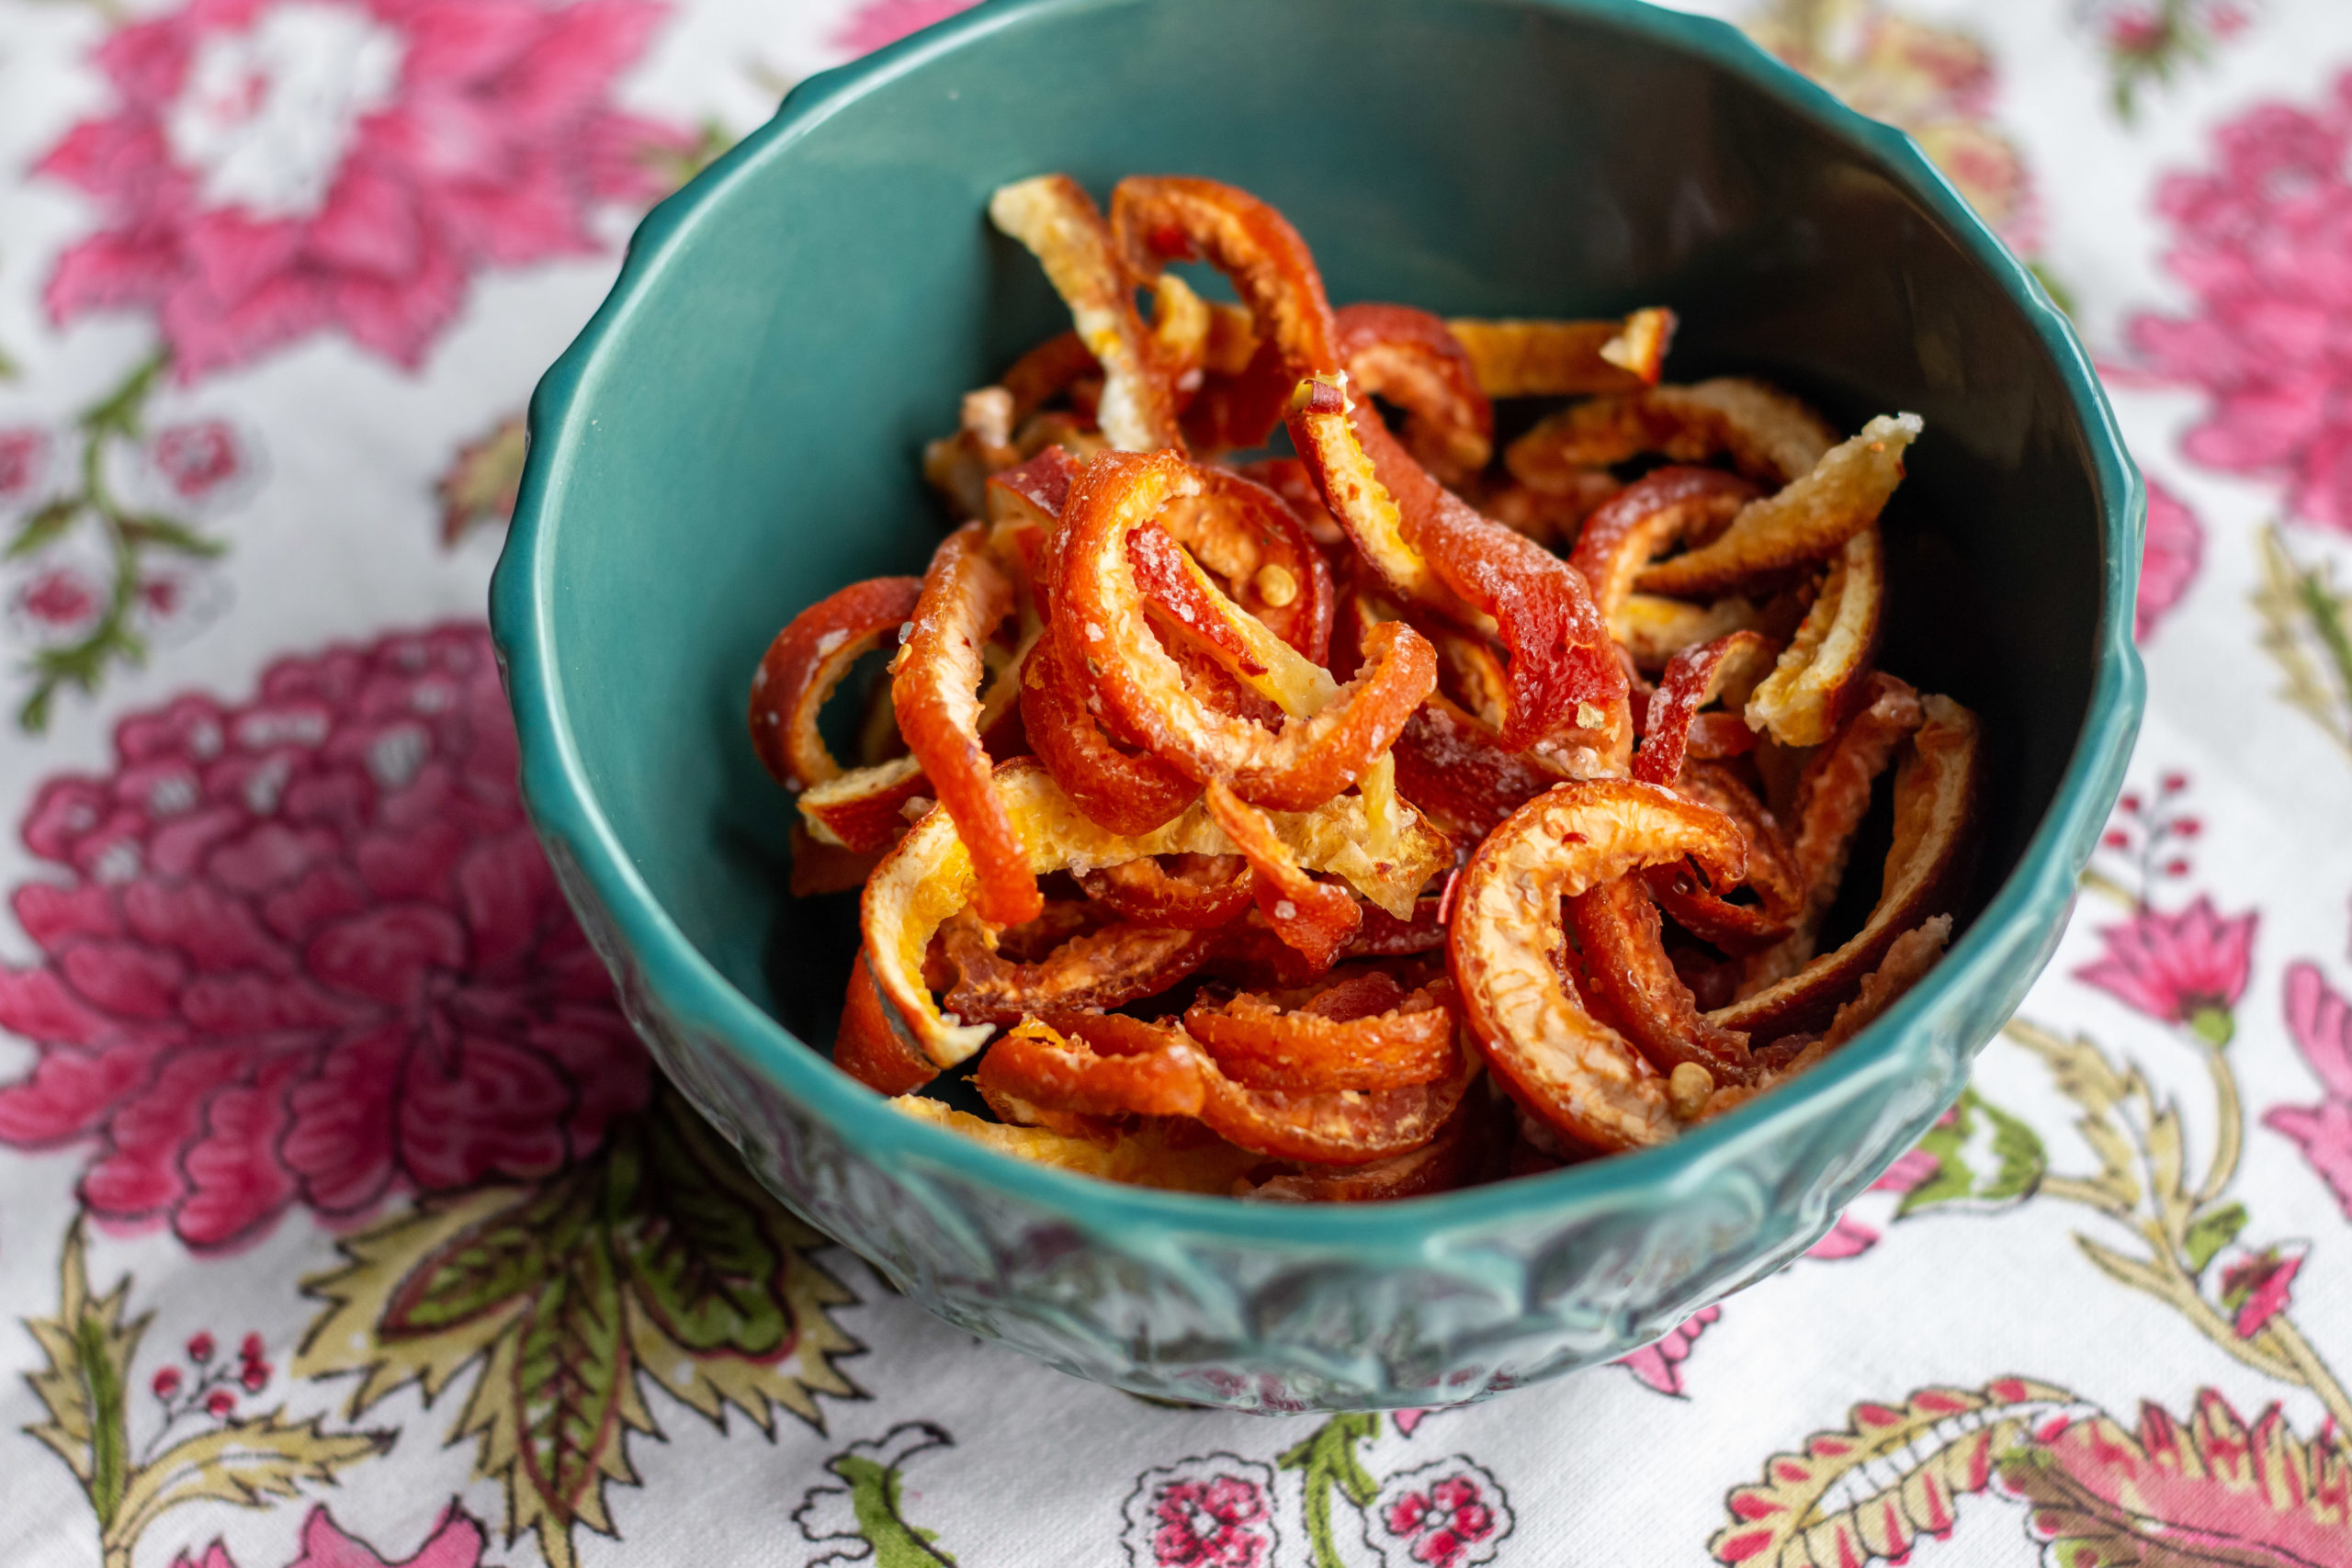 Candied citrus peel in a teal ceramic bowl on a floral tablecloth